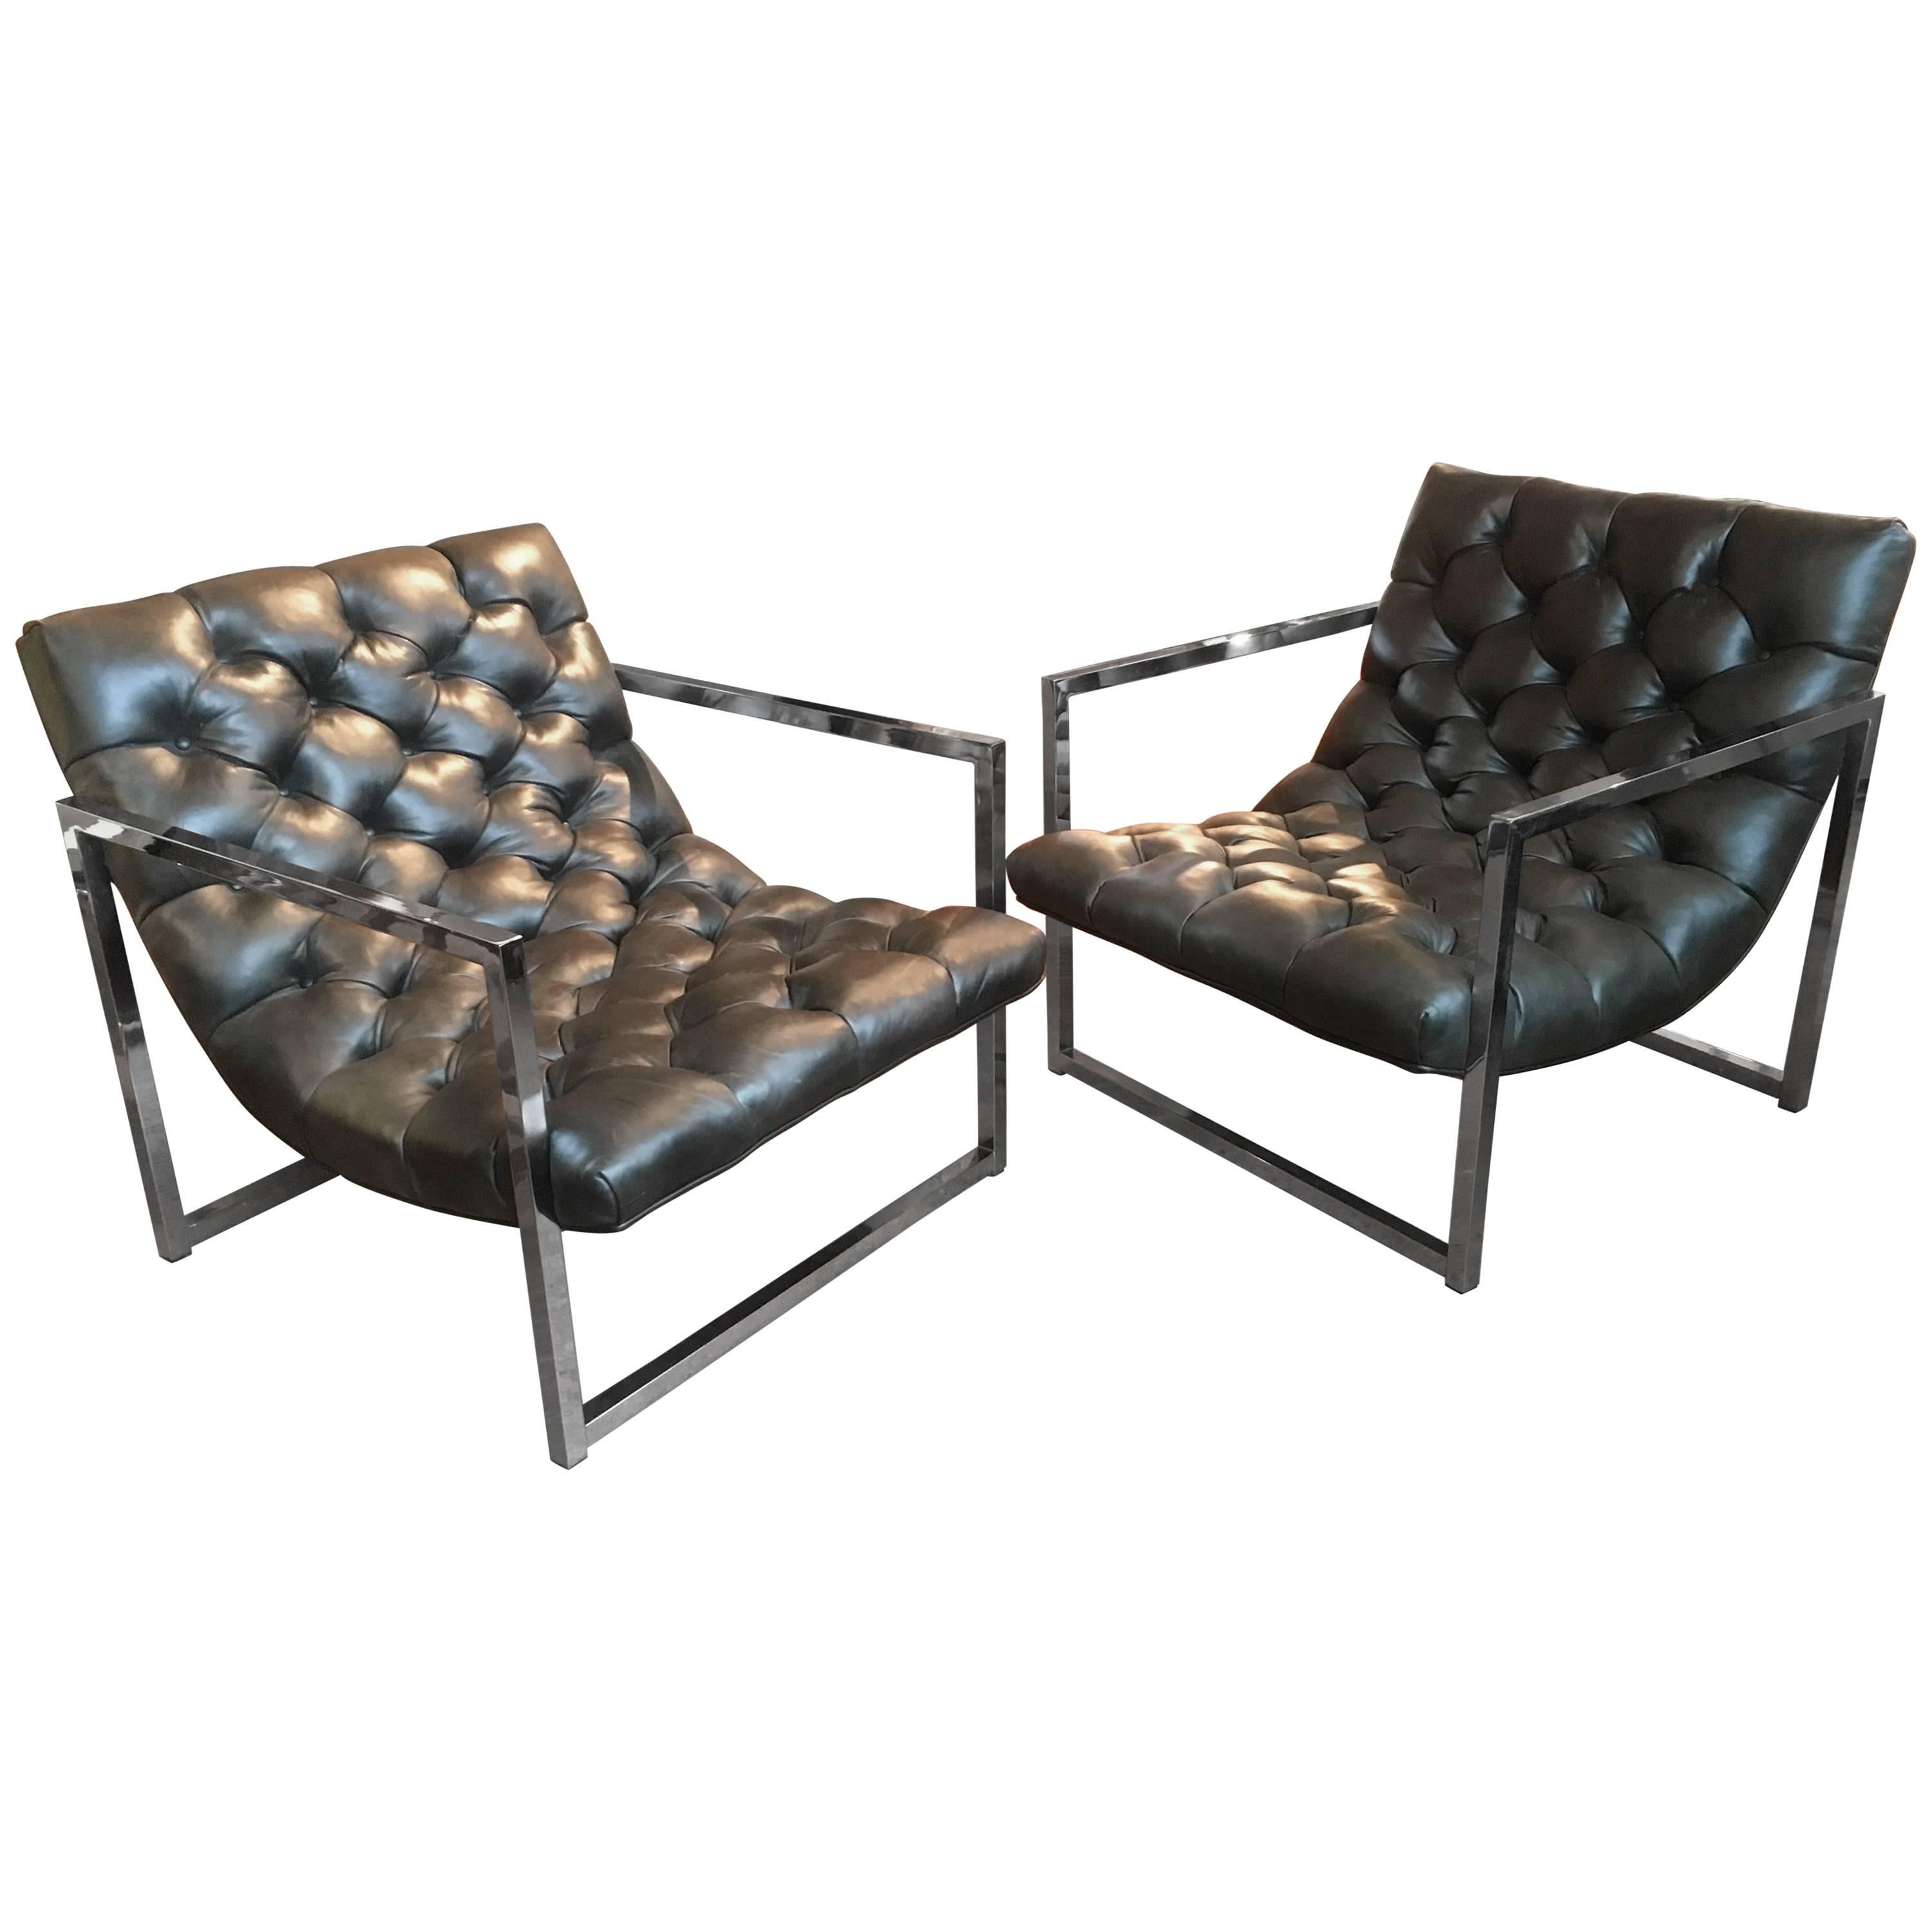 Pair of Chrome and Tufted Leather Lounge Chairs, Milo Baughman